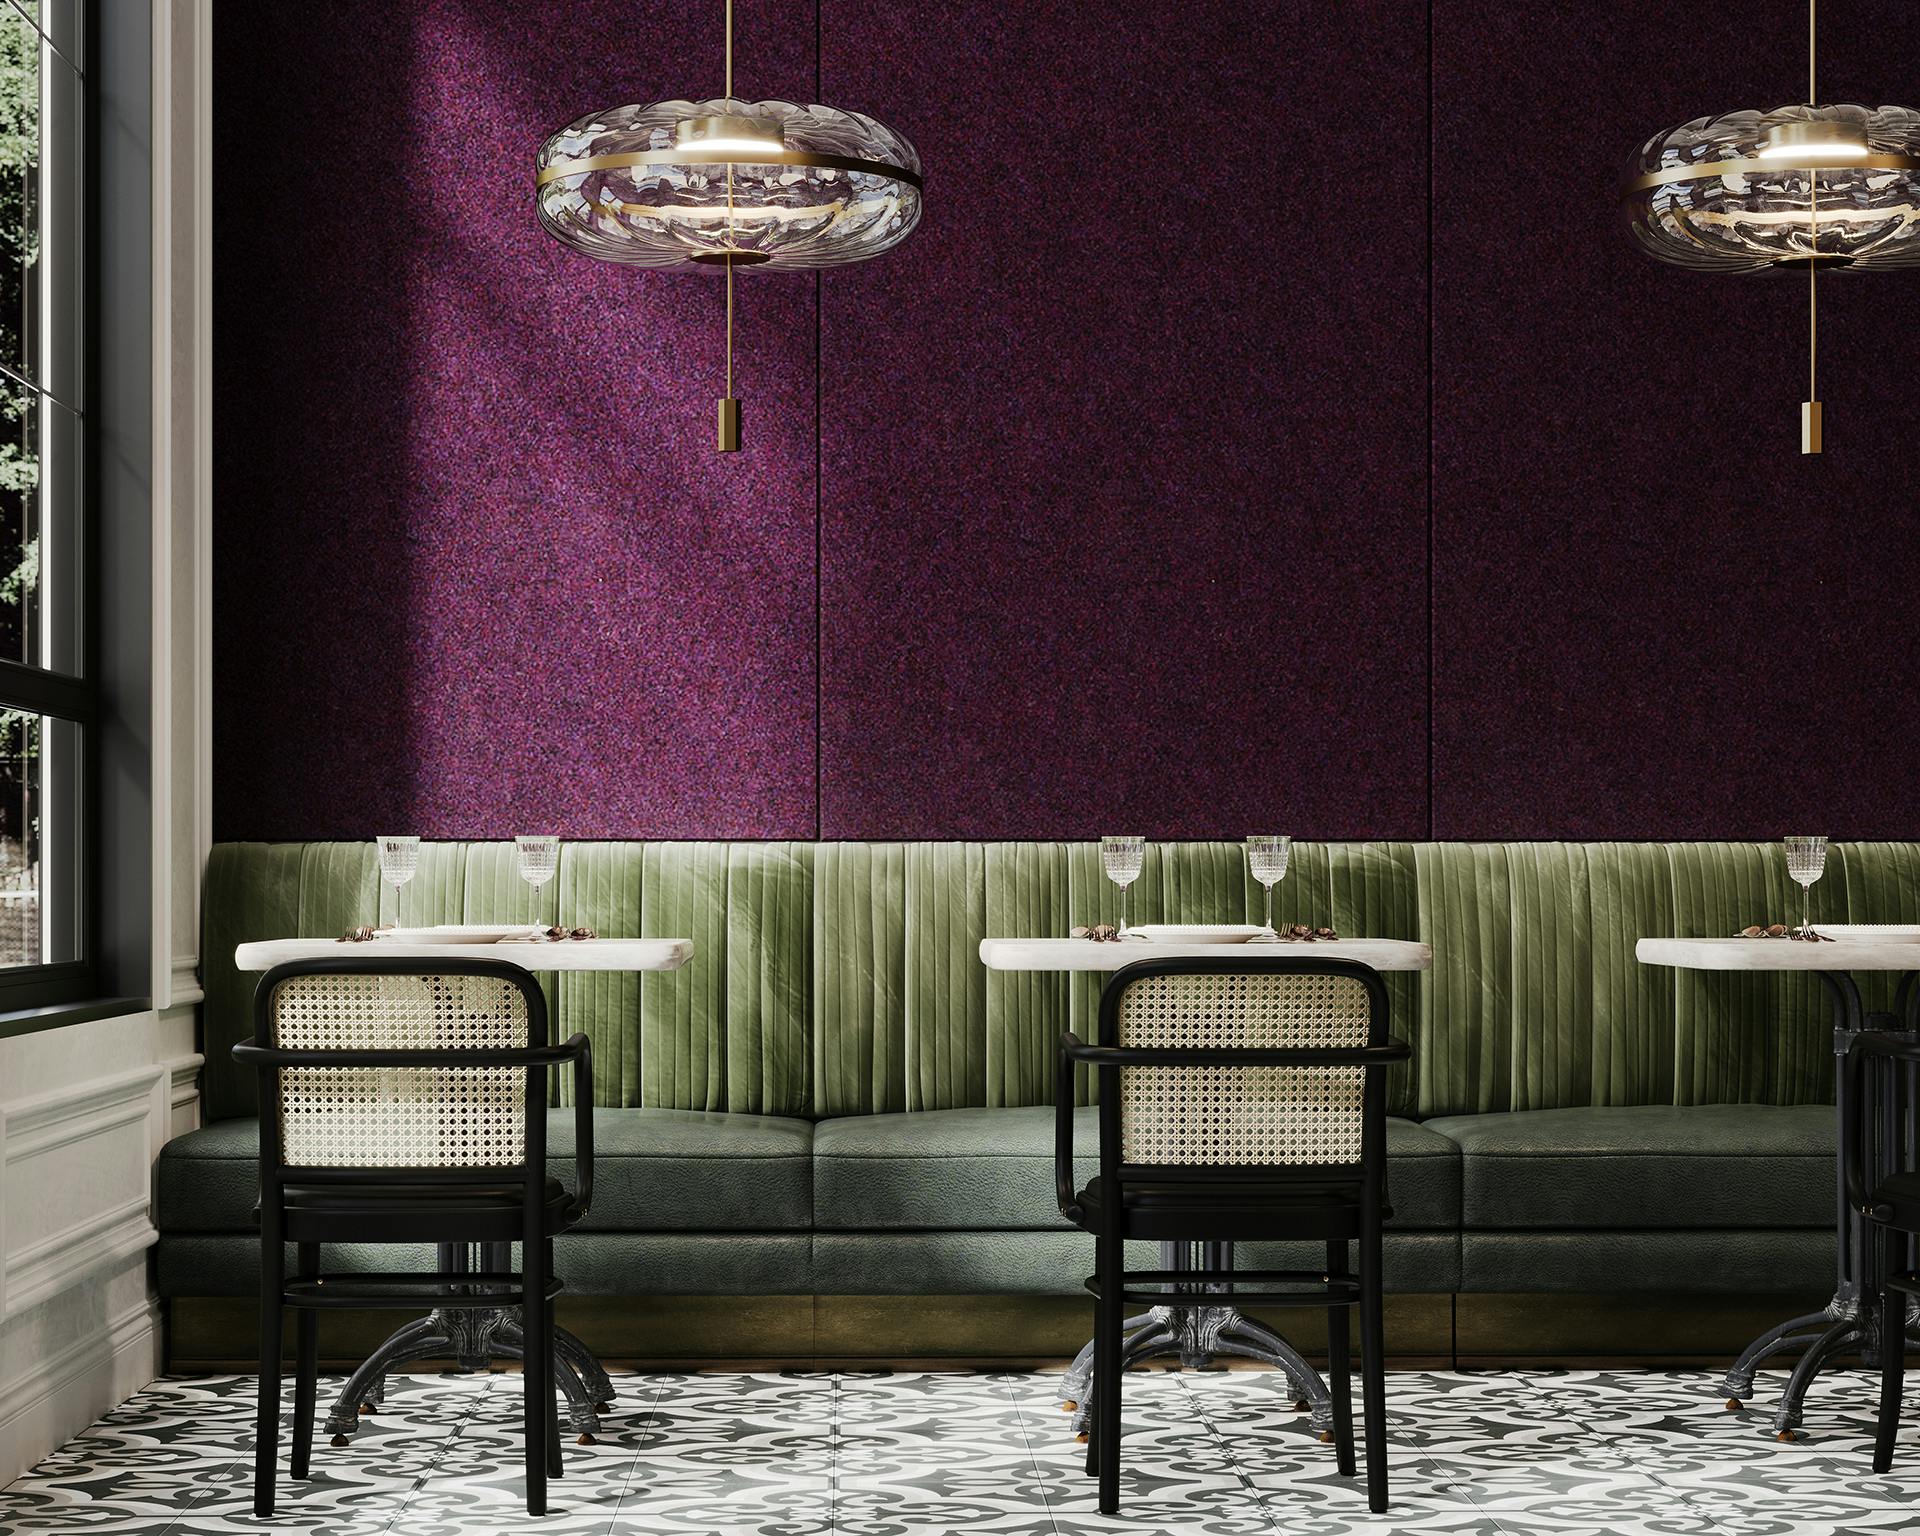 A chic restaurant interior featuring green velvet banquette seating against a dark purple textured acoustic felt paneled wall. Black and white patterned tile floor complements the space. Three modern pendant lights hang above marble-topped tables with black chairs.